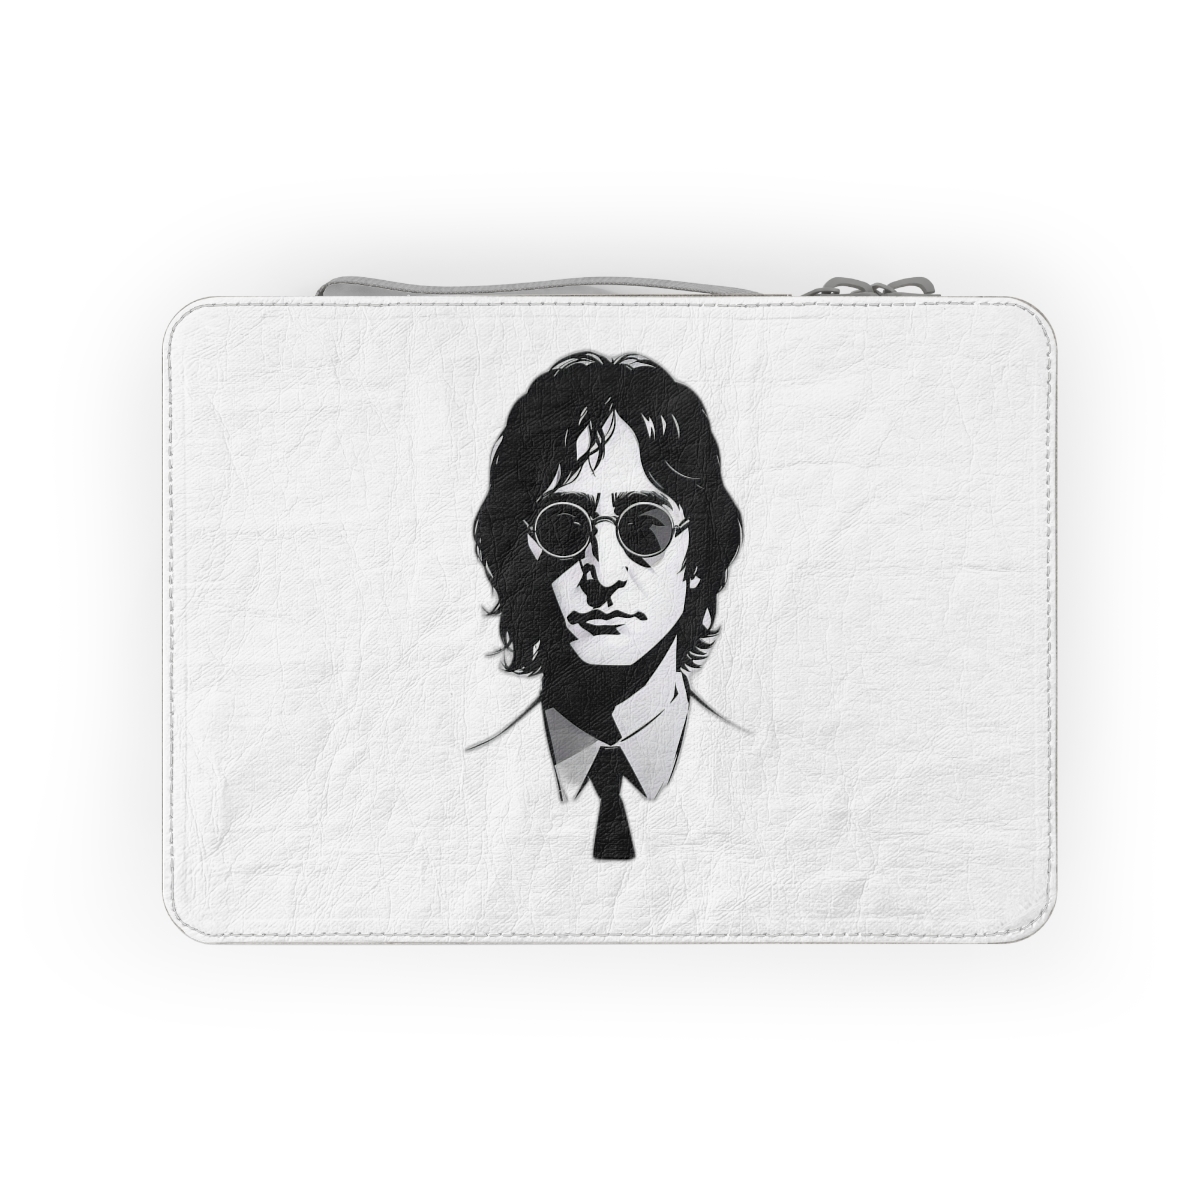 Primary image for Personalized Paper Lunch Bag with Zipper and Strap, Unique Design Featuring John